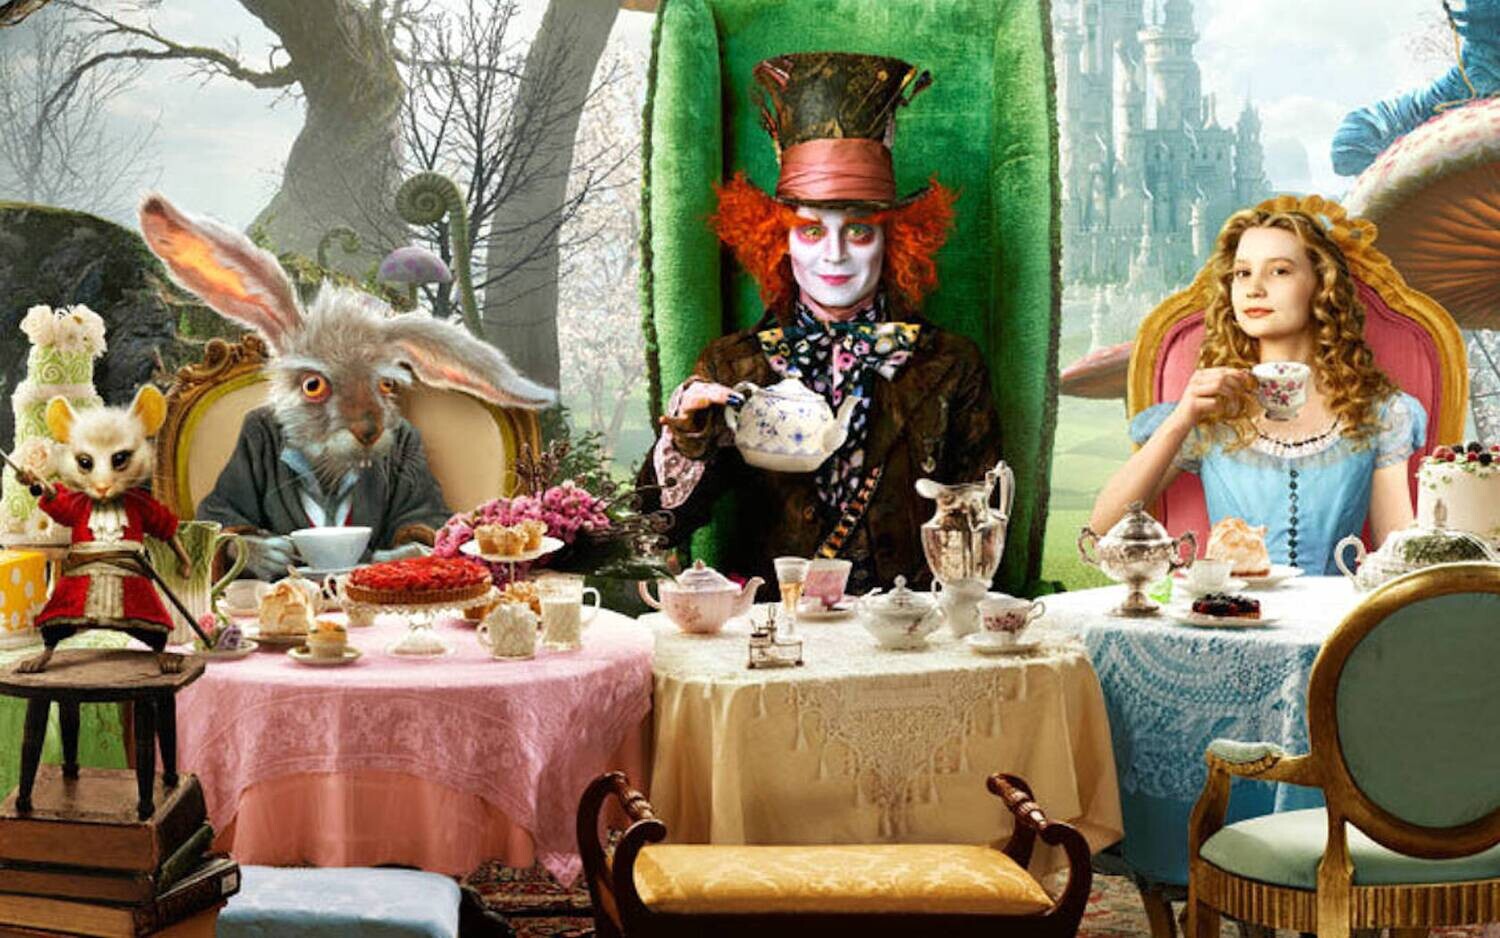 "Mad Hatter" tea party ***IN STORE EXPERIENCE